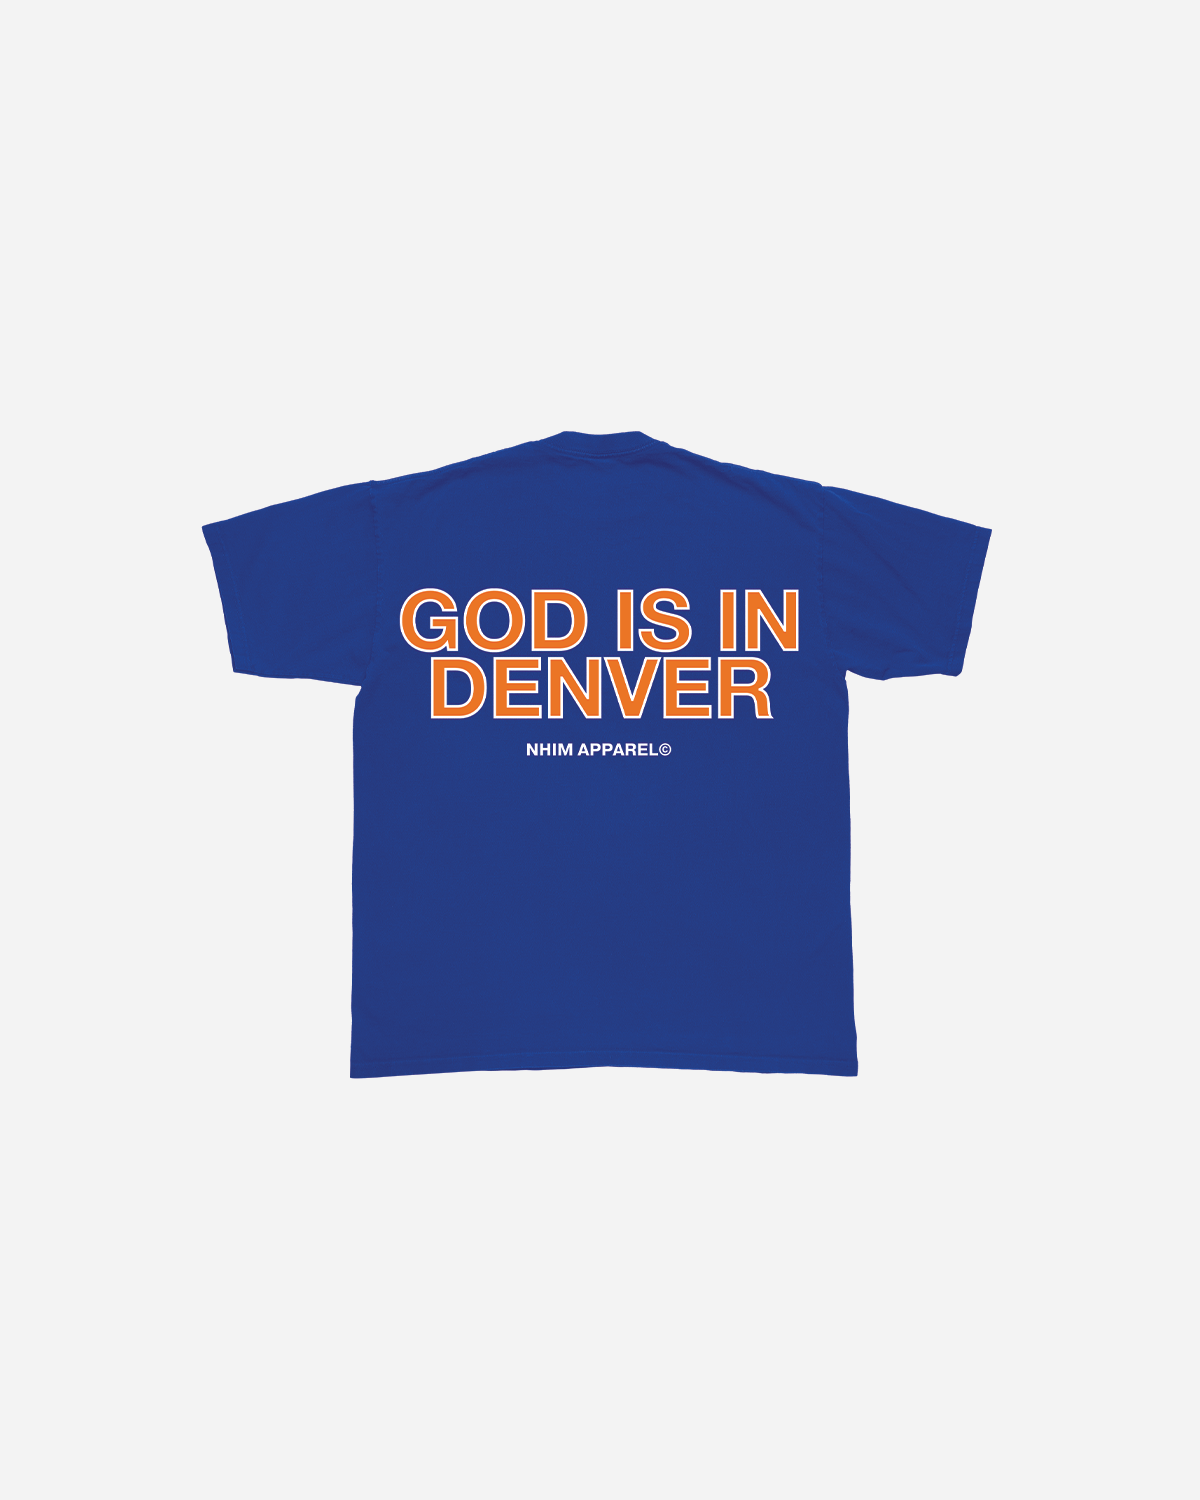 GOD IS IN DENVER Christian t shirt by NHIM APPAREL. blue shirt with orange writing